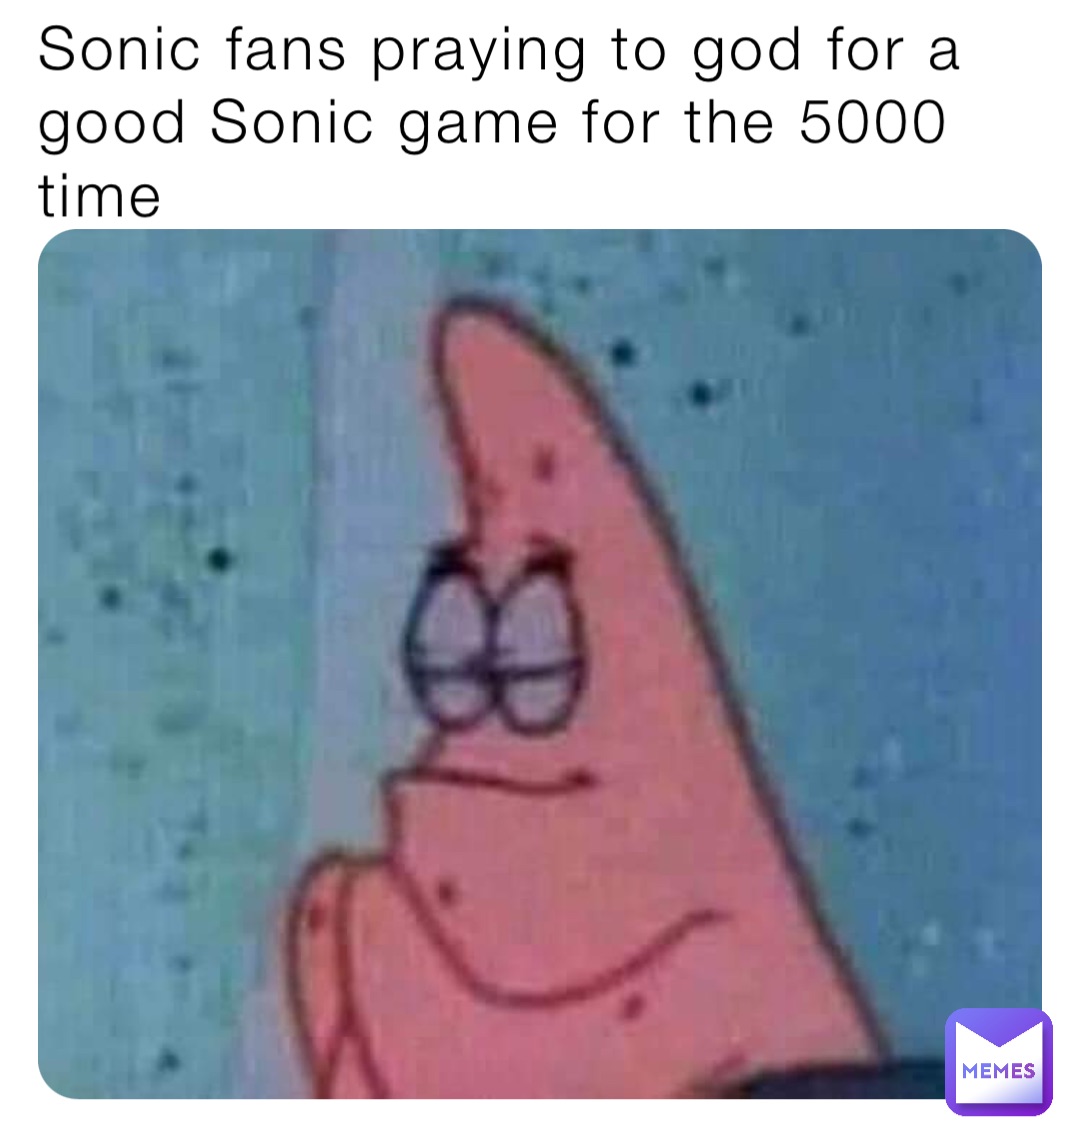 Sonic fans praying to god for a good Sonic game for the 5000 time